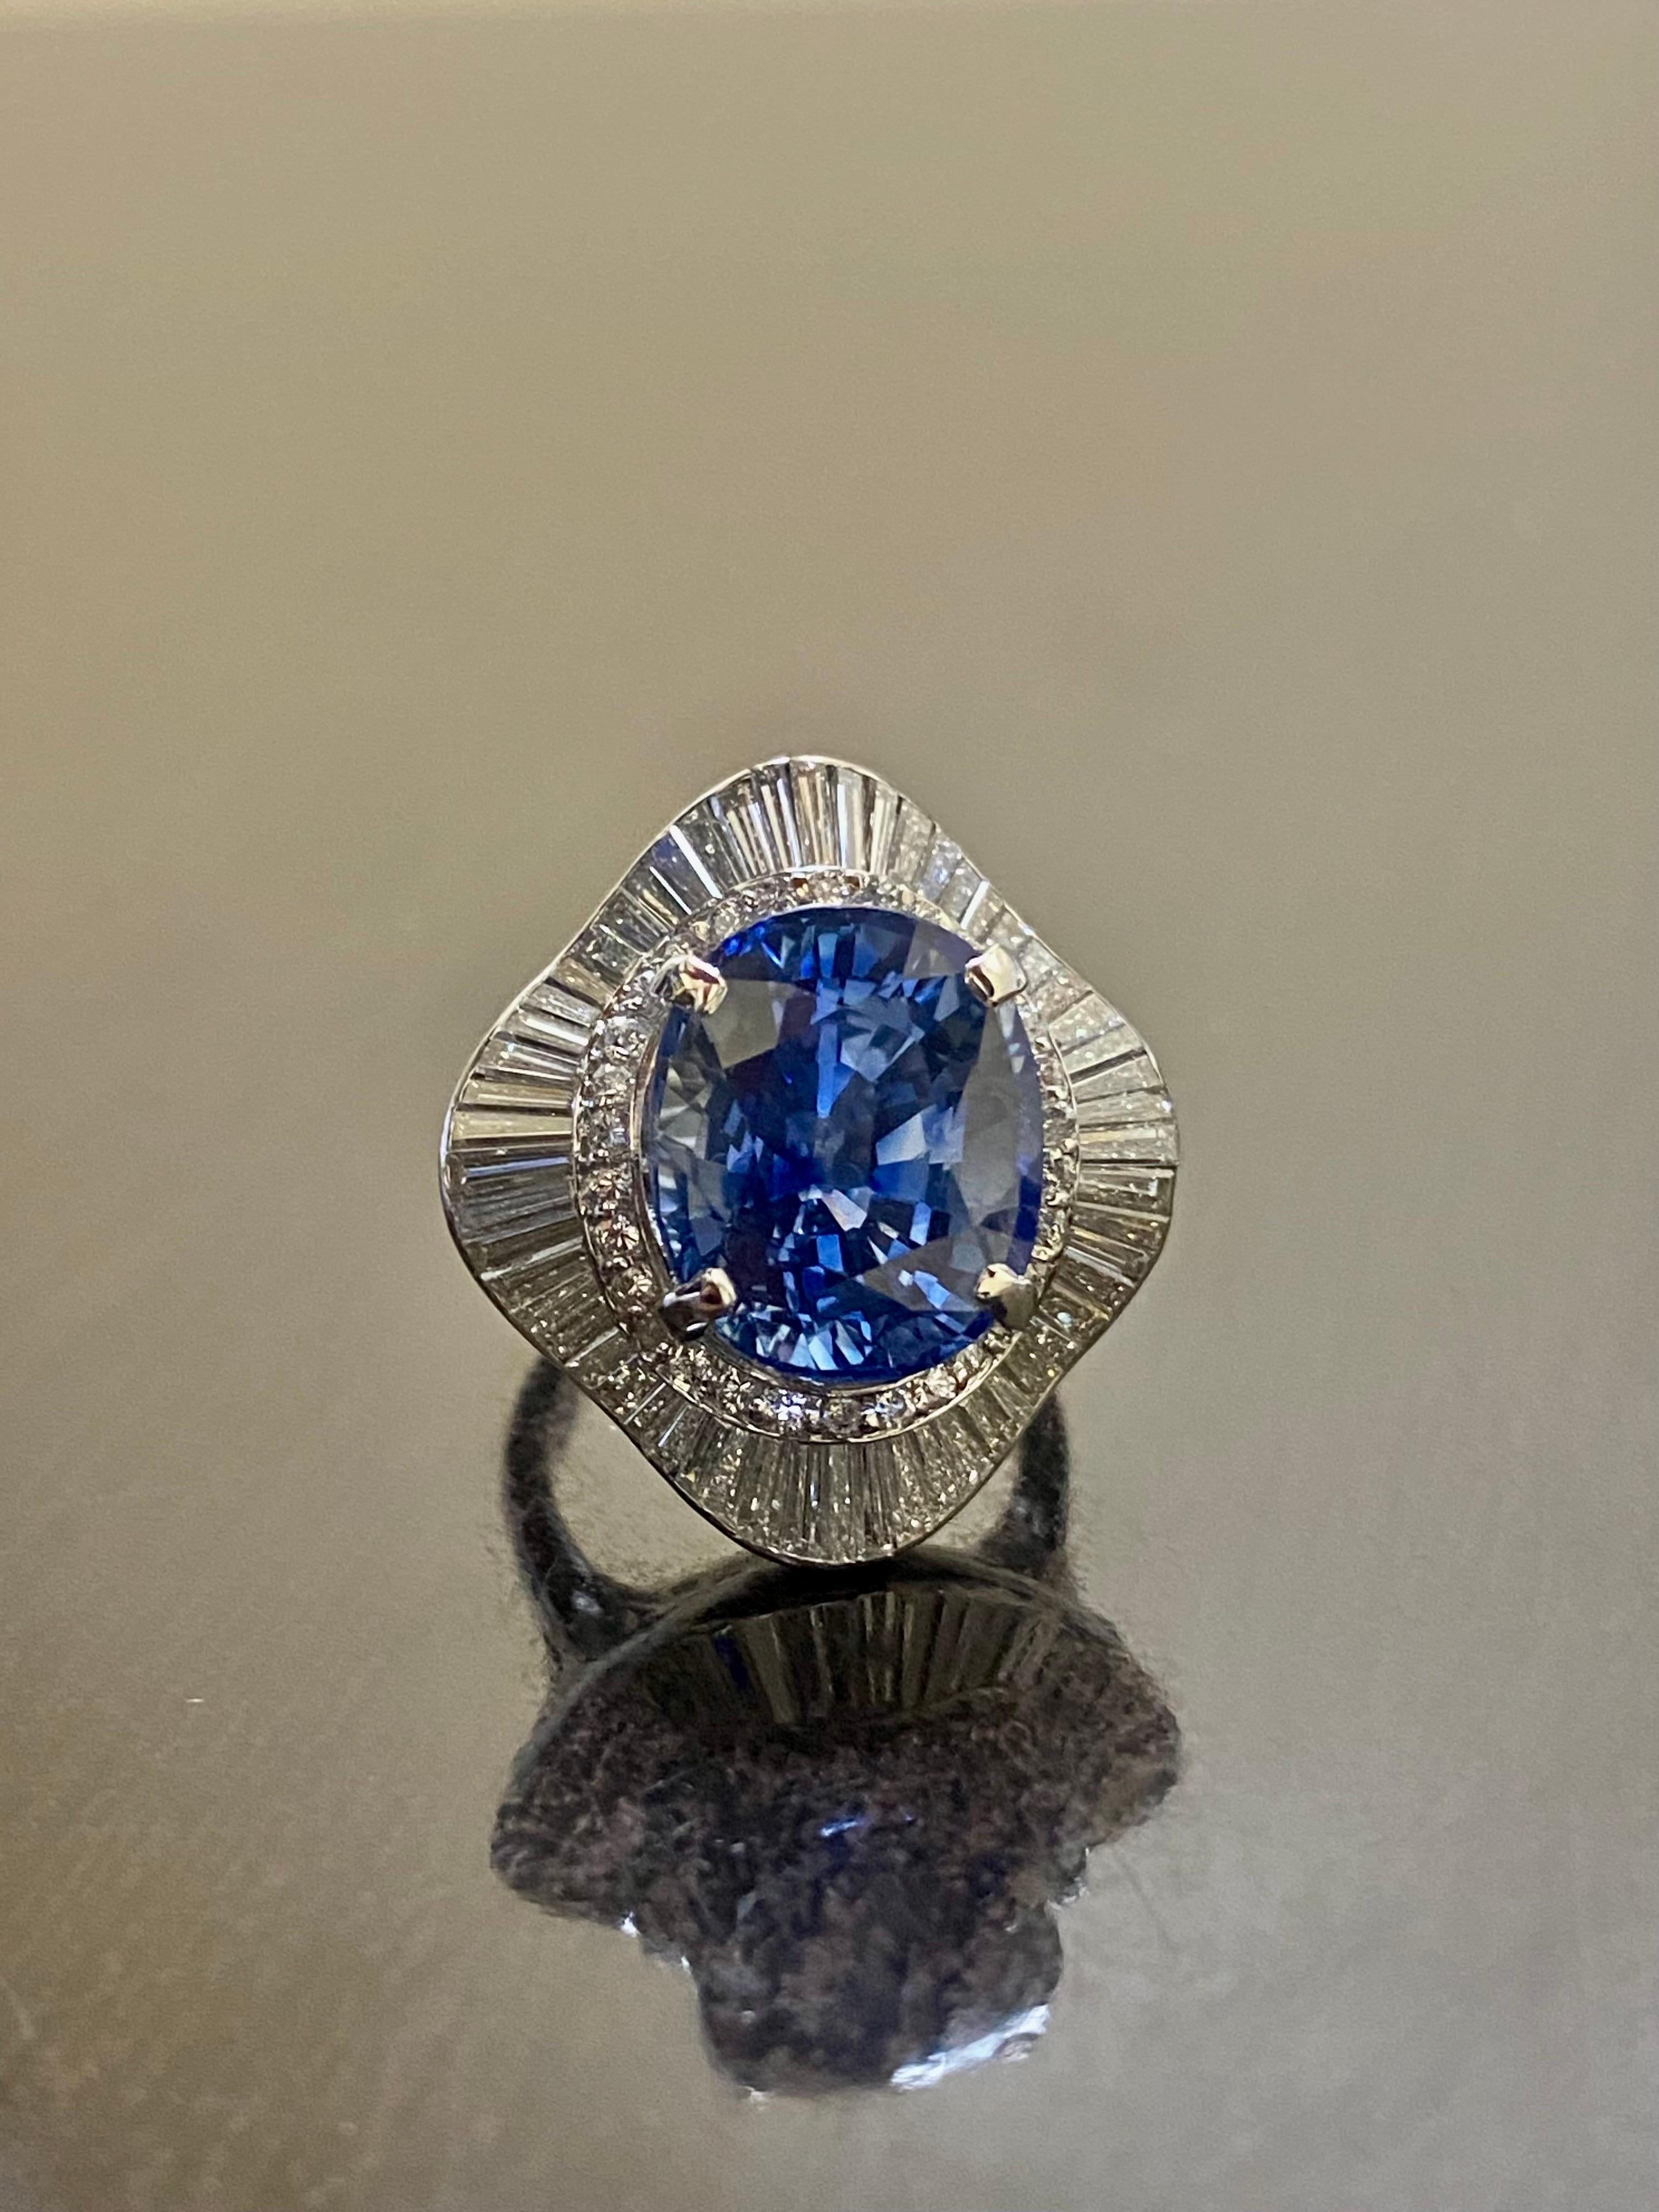 DeKara Designs Collection

Our latest design! An elegant and lustrous Oval Blue Sapphire surrounded beautifully by baguette diamonds in a halo setting.

Metal- 90% Platinum, 10% Iridium.

Stones- GIA Certified Oval Blue Sapphire 10.47 Carats, 55